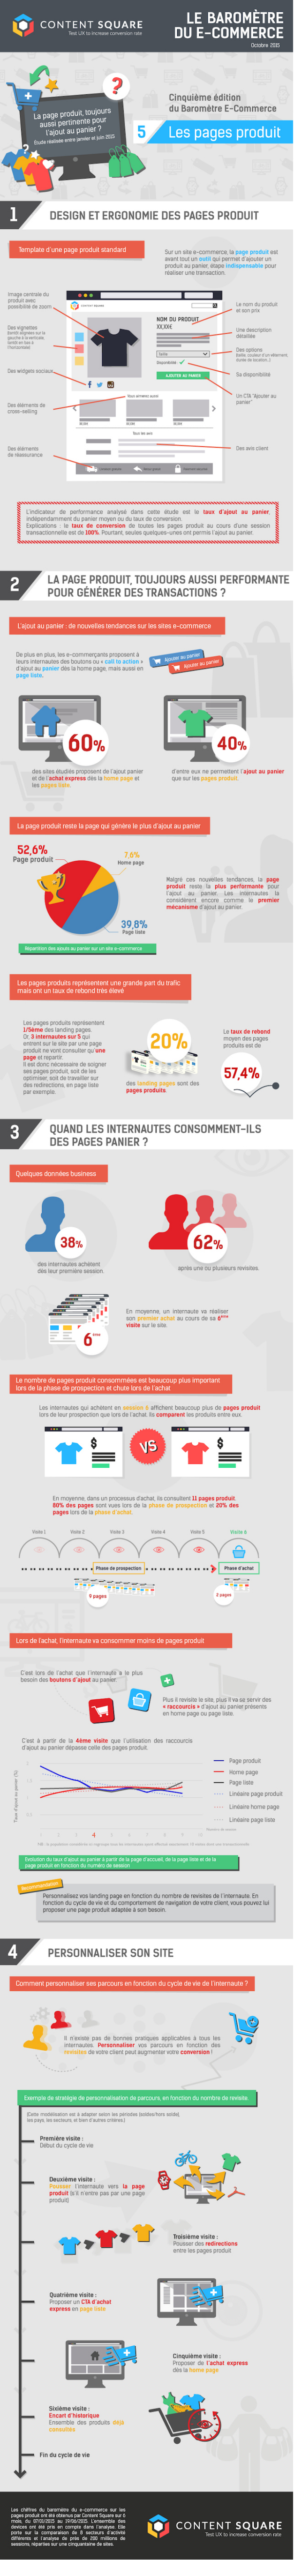 ecommerce-infographie